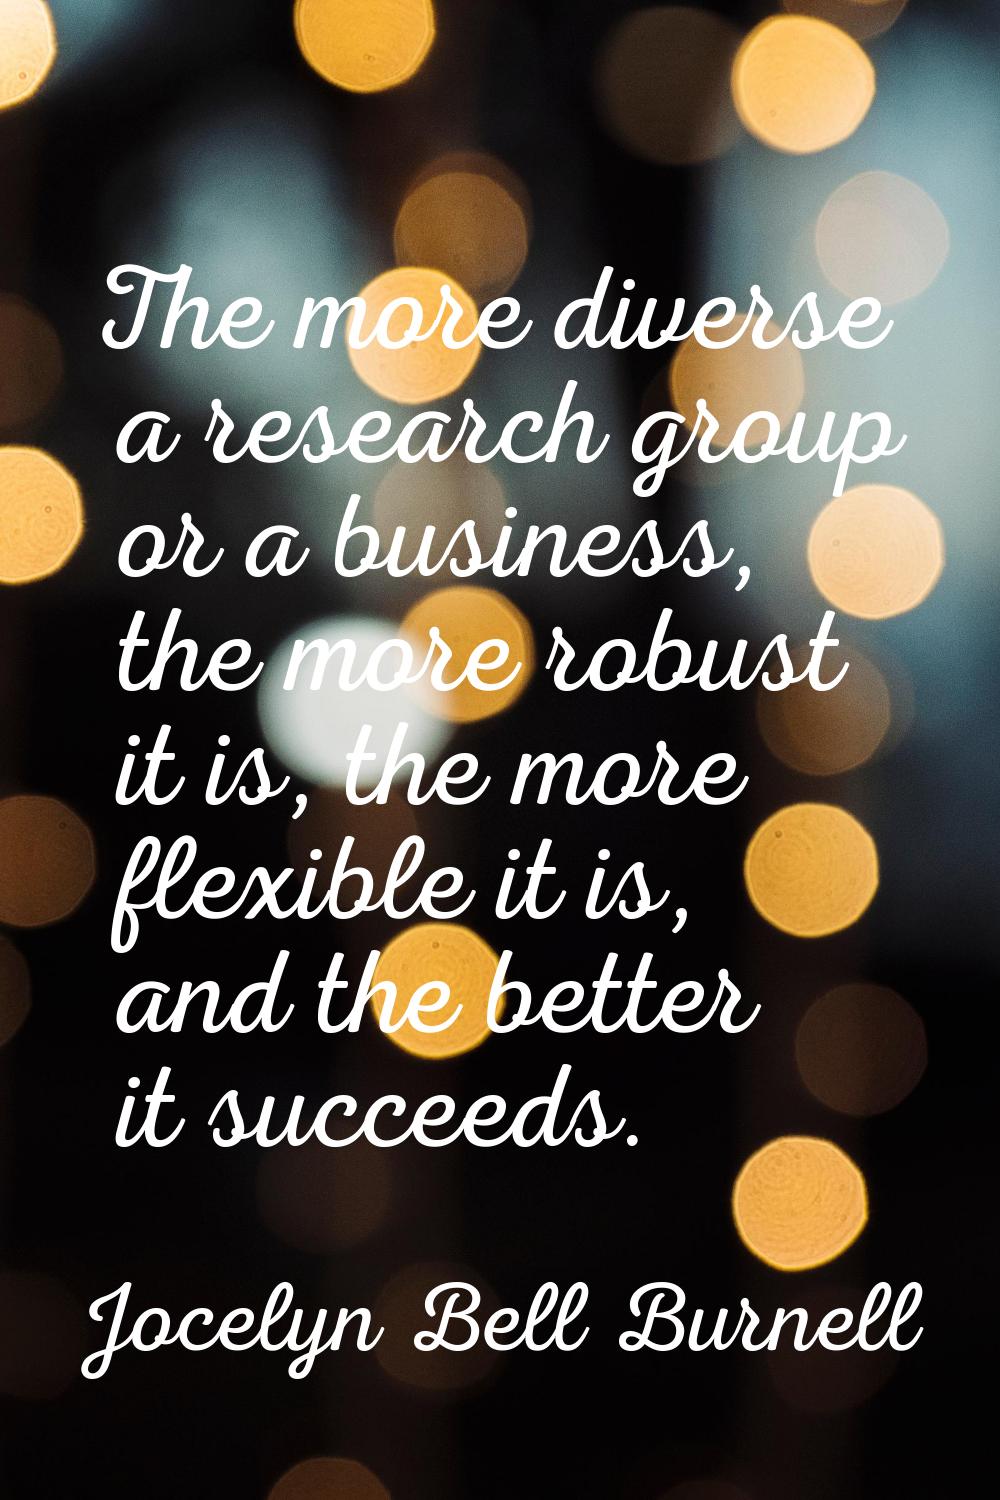 The more diverse a research group or a business, the more robust it is, the more flexible it is, an